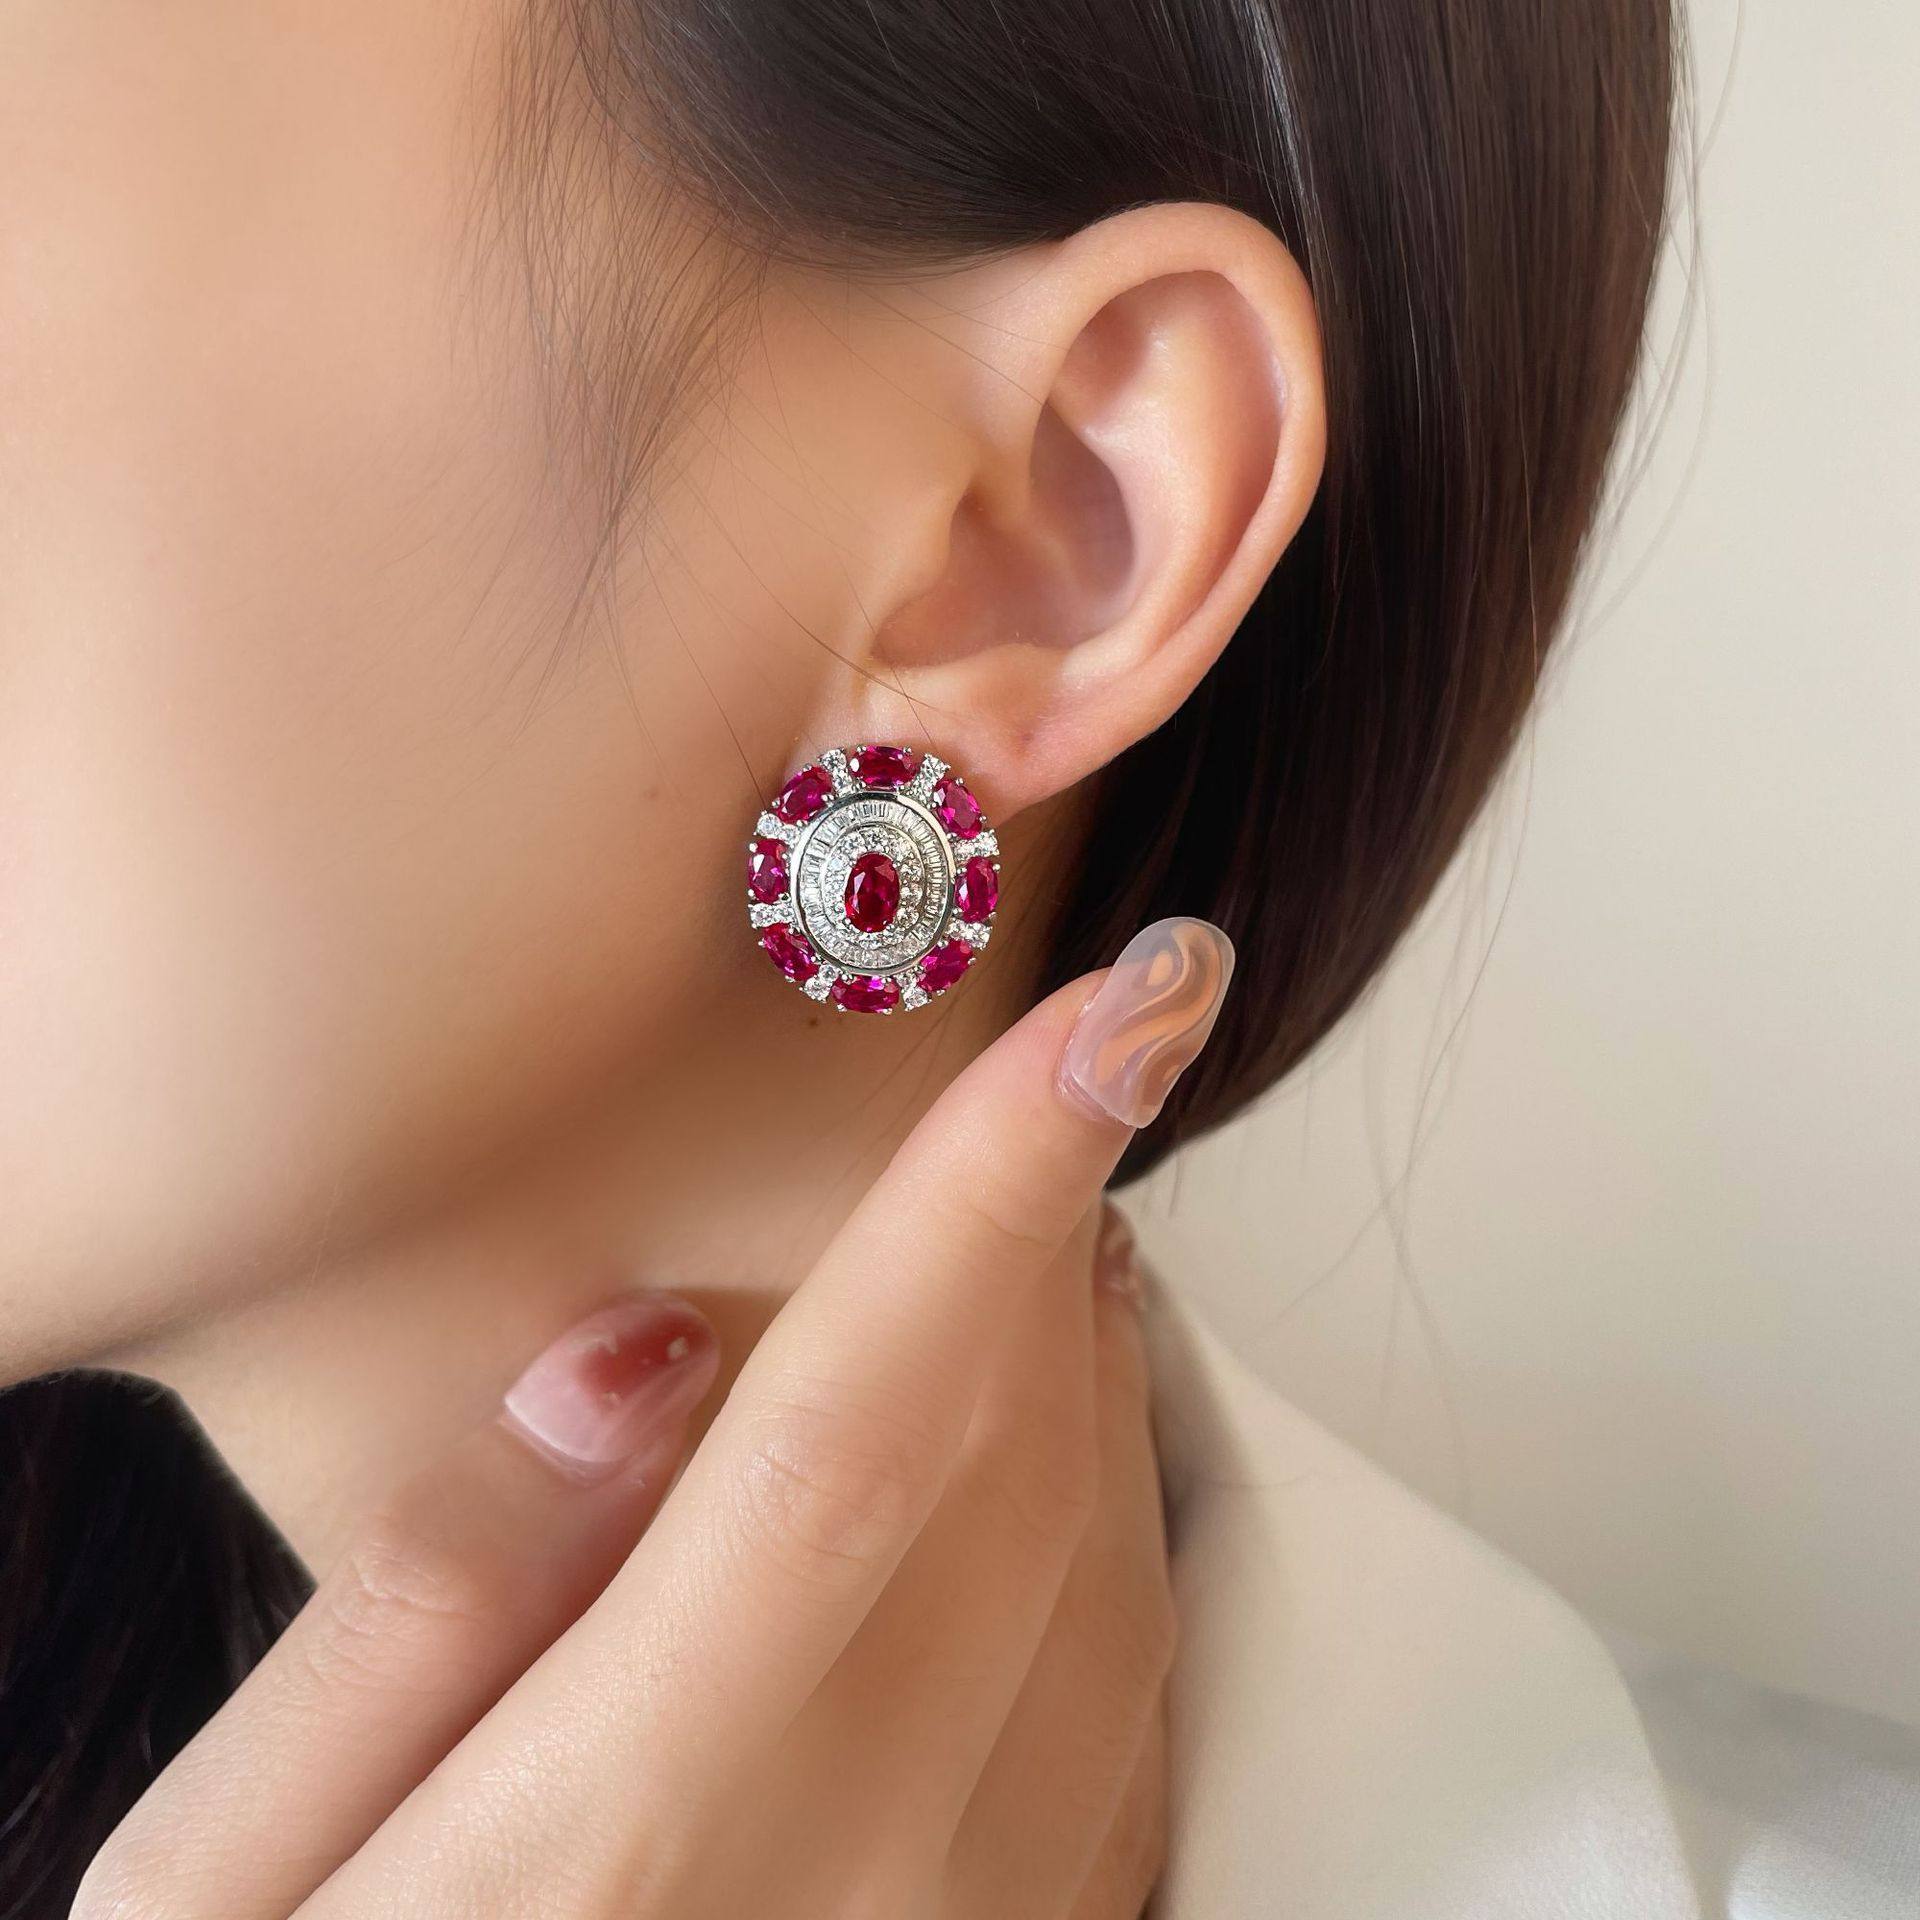 Retro Small Ruby Studs Earrings - HER'S